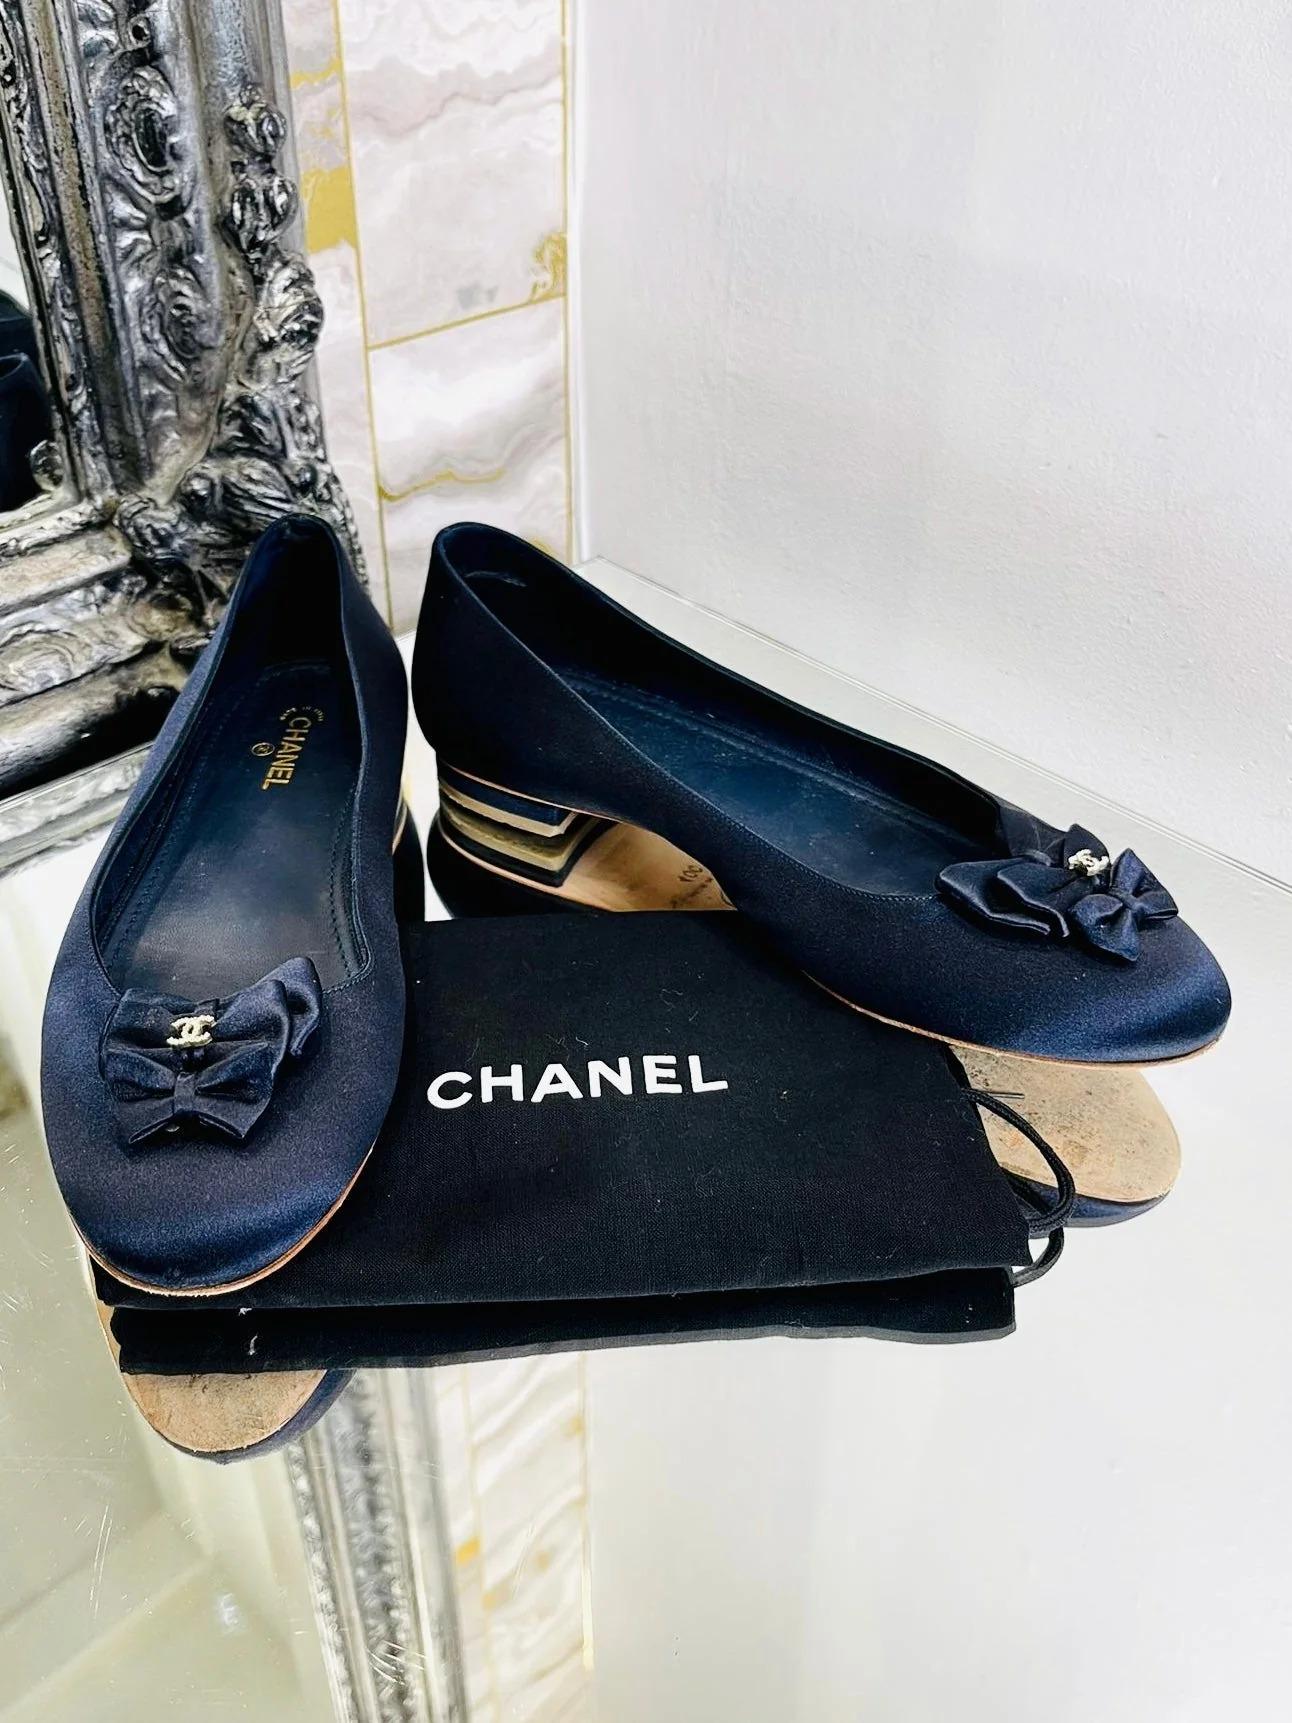 Women's Chanel Satin Bow & Crystal 'CC' Logo Ballet Flats For Sale